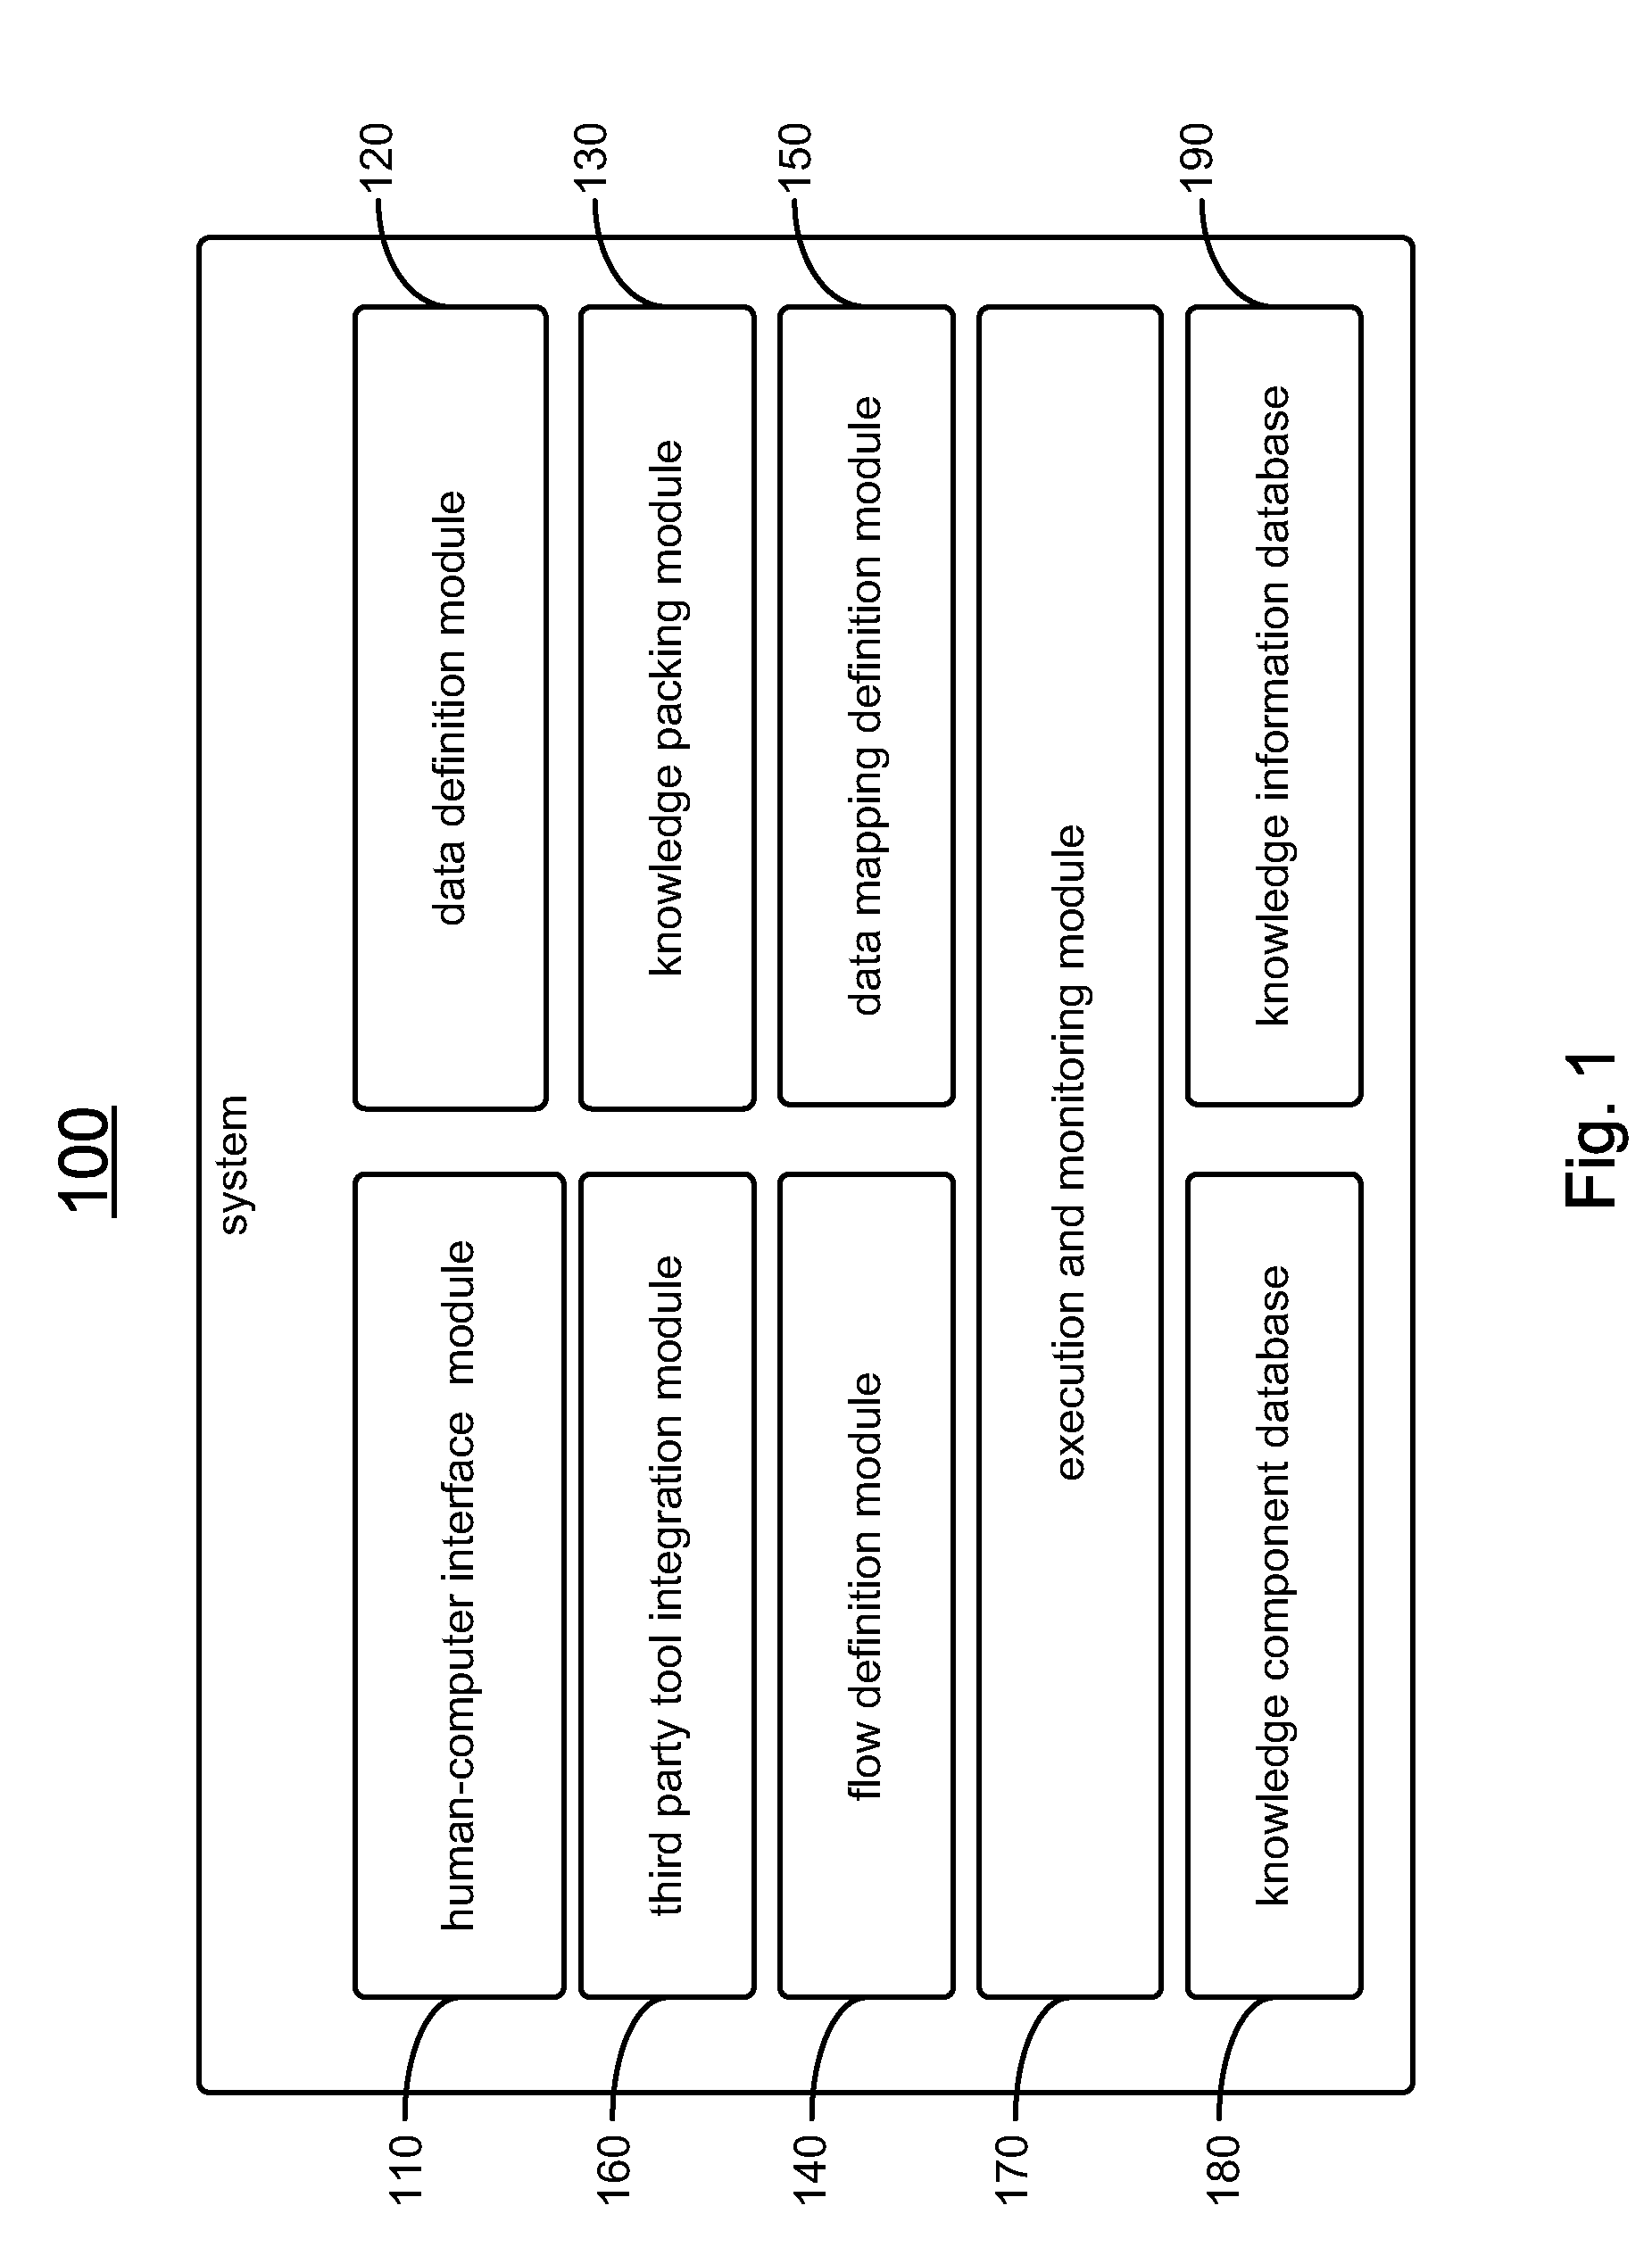 Method and System of Knowledge Component Based Engineering Design